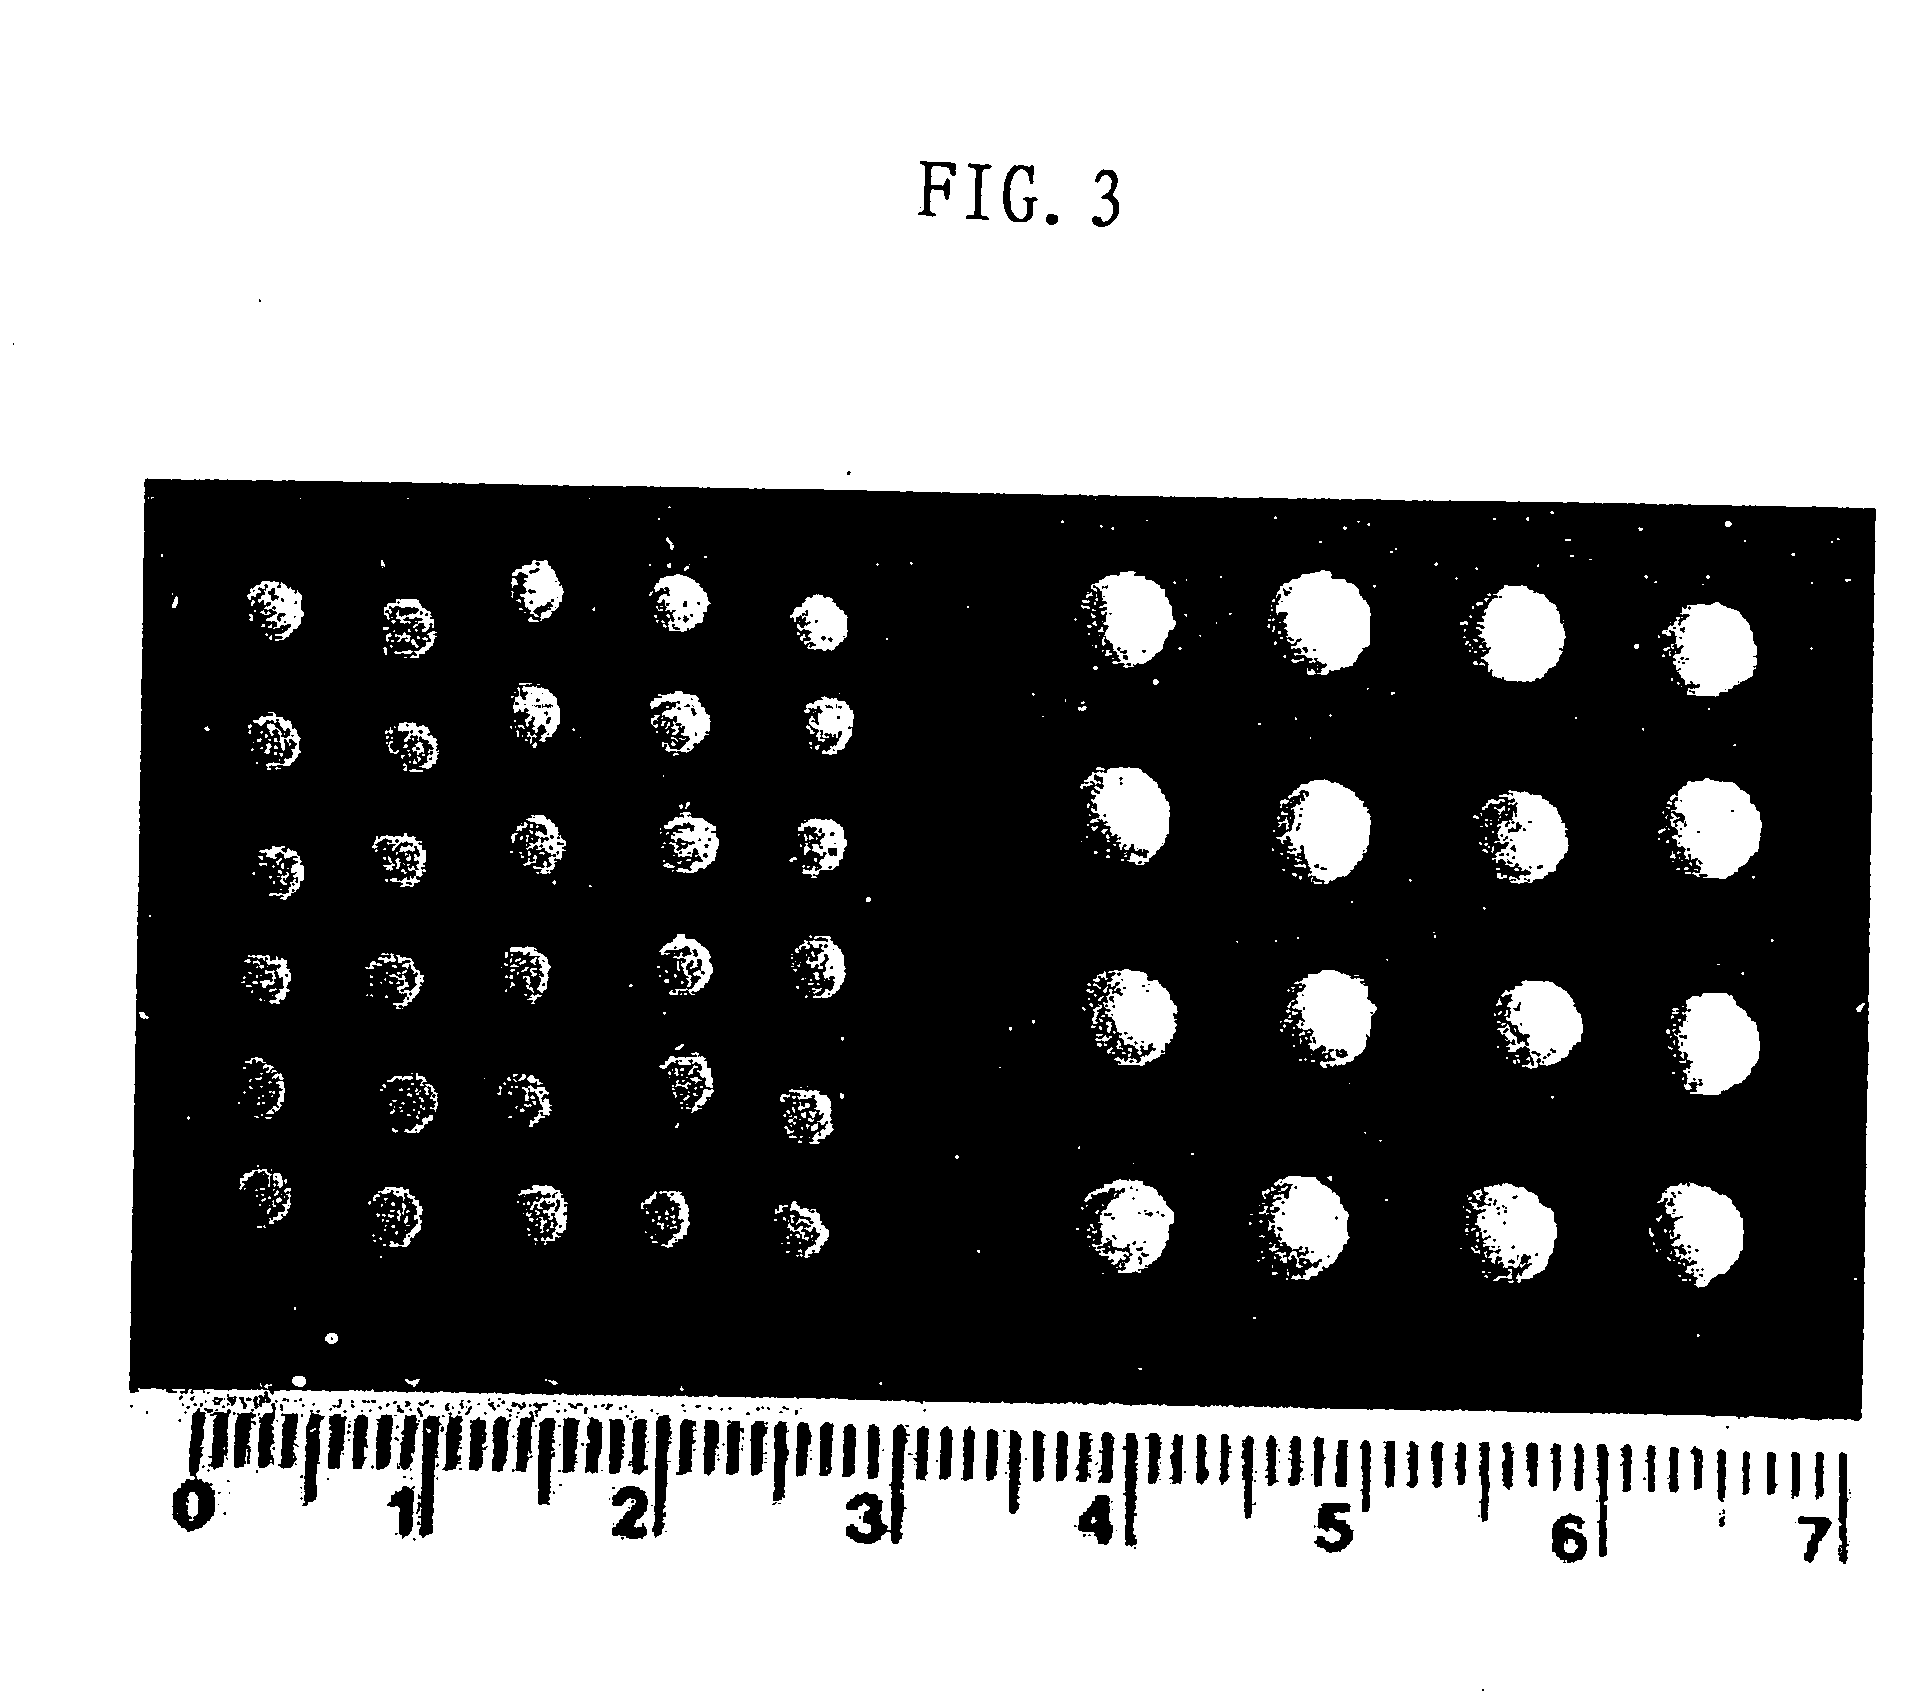 Scaffold product for human bone tissue engineering, methods for its preparation and uses thereof